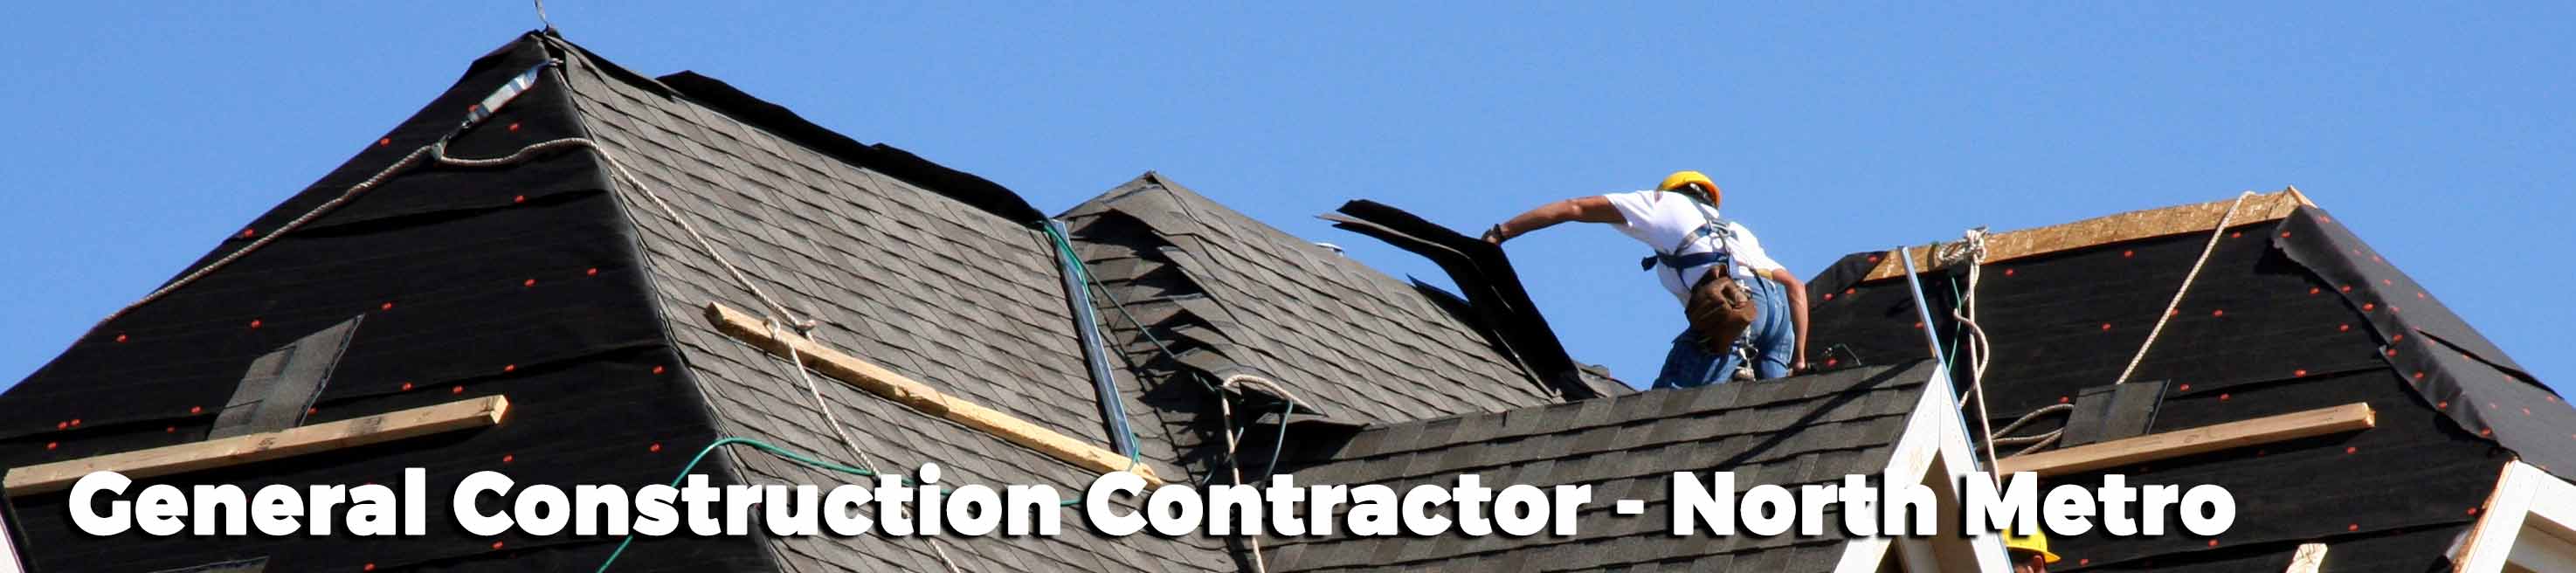 roofing-siding-windows-welter-construction-north-metro-mn